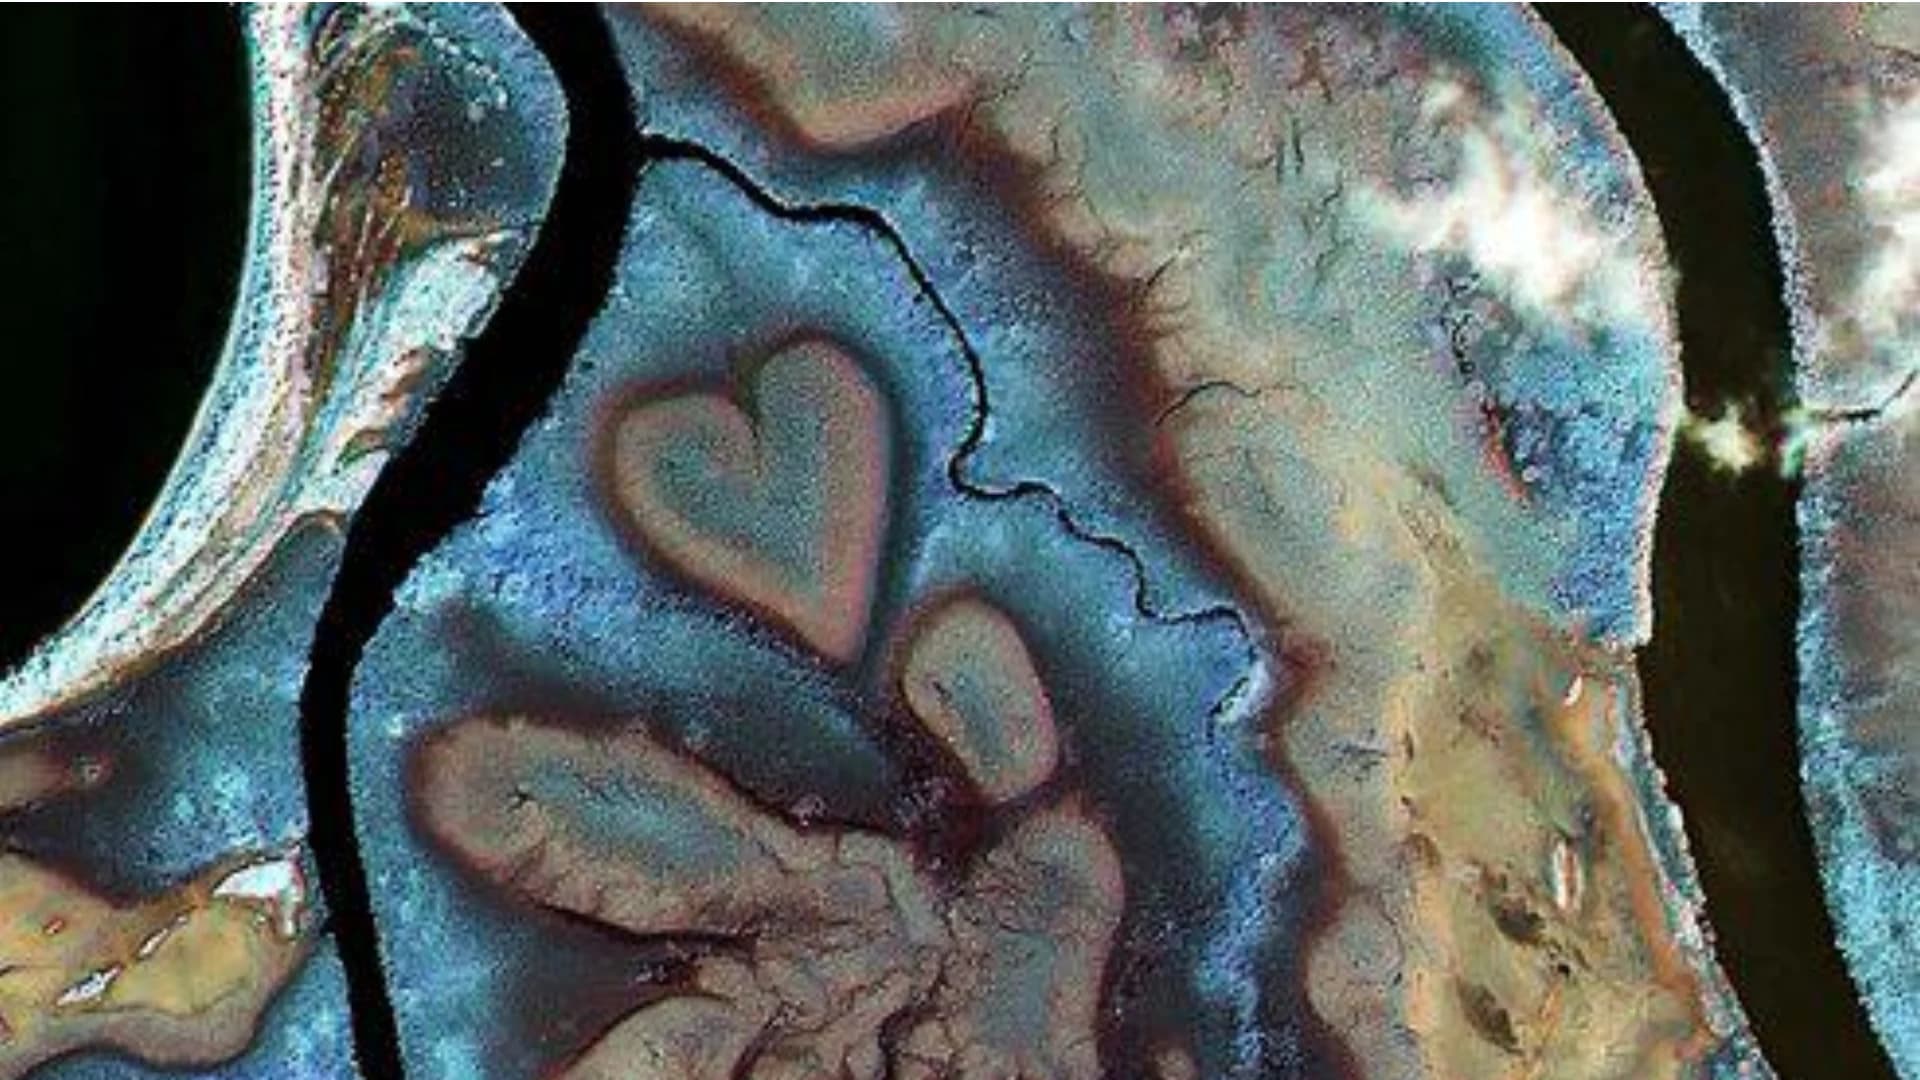 Is Earth in love?! Here are 9 hearts in nature to virtually visit for Valentine’s Day